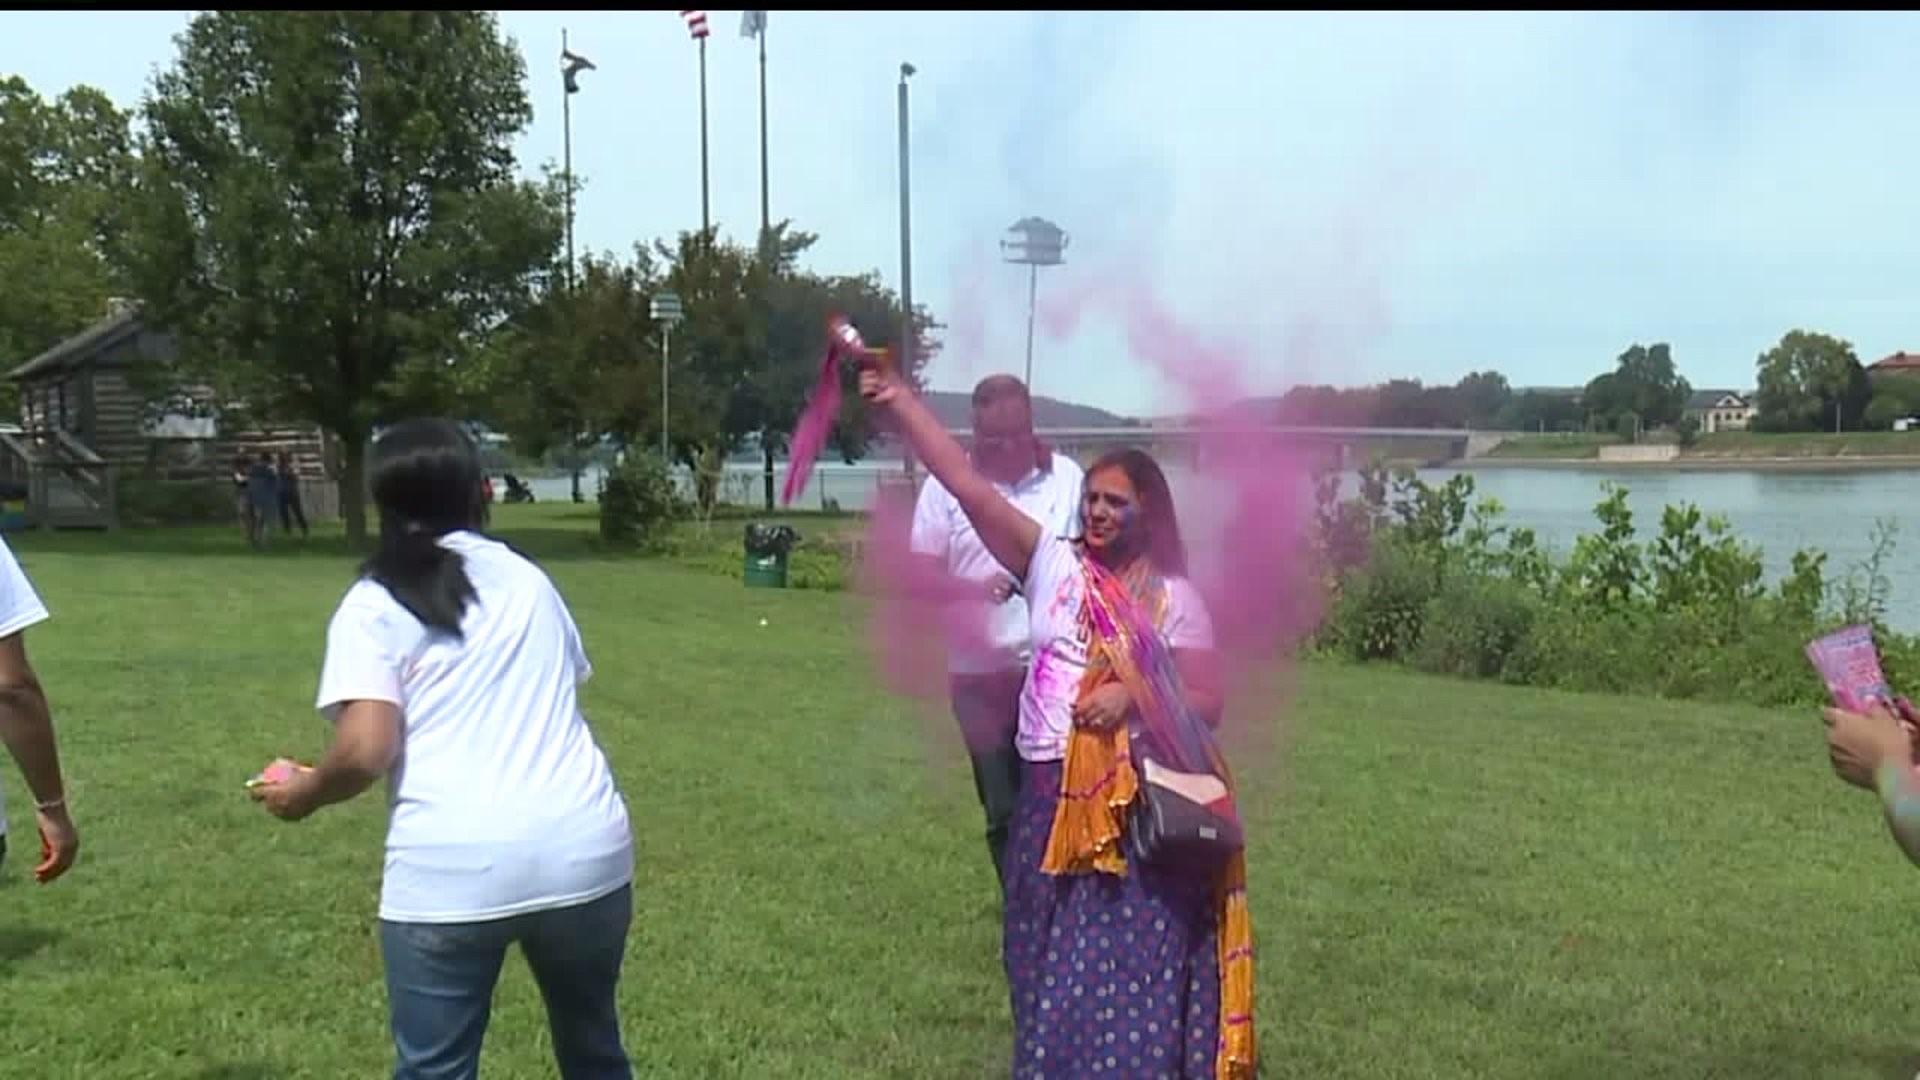 103rd Kipona Fest bring thousands to Harrisburg to join in a Hindu celebration